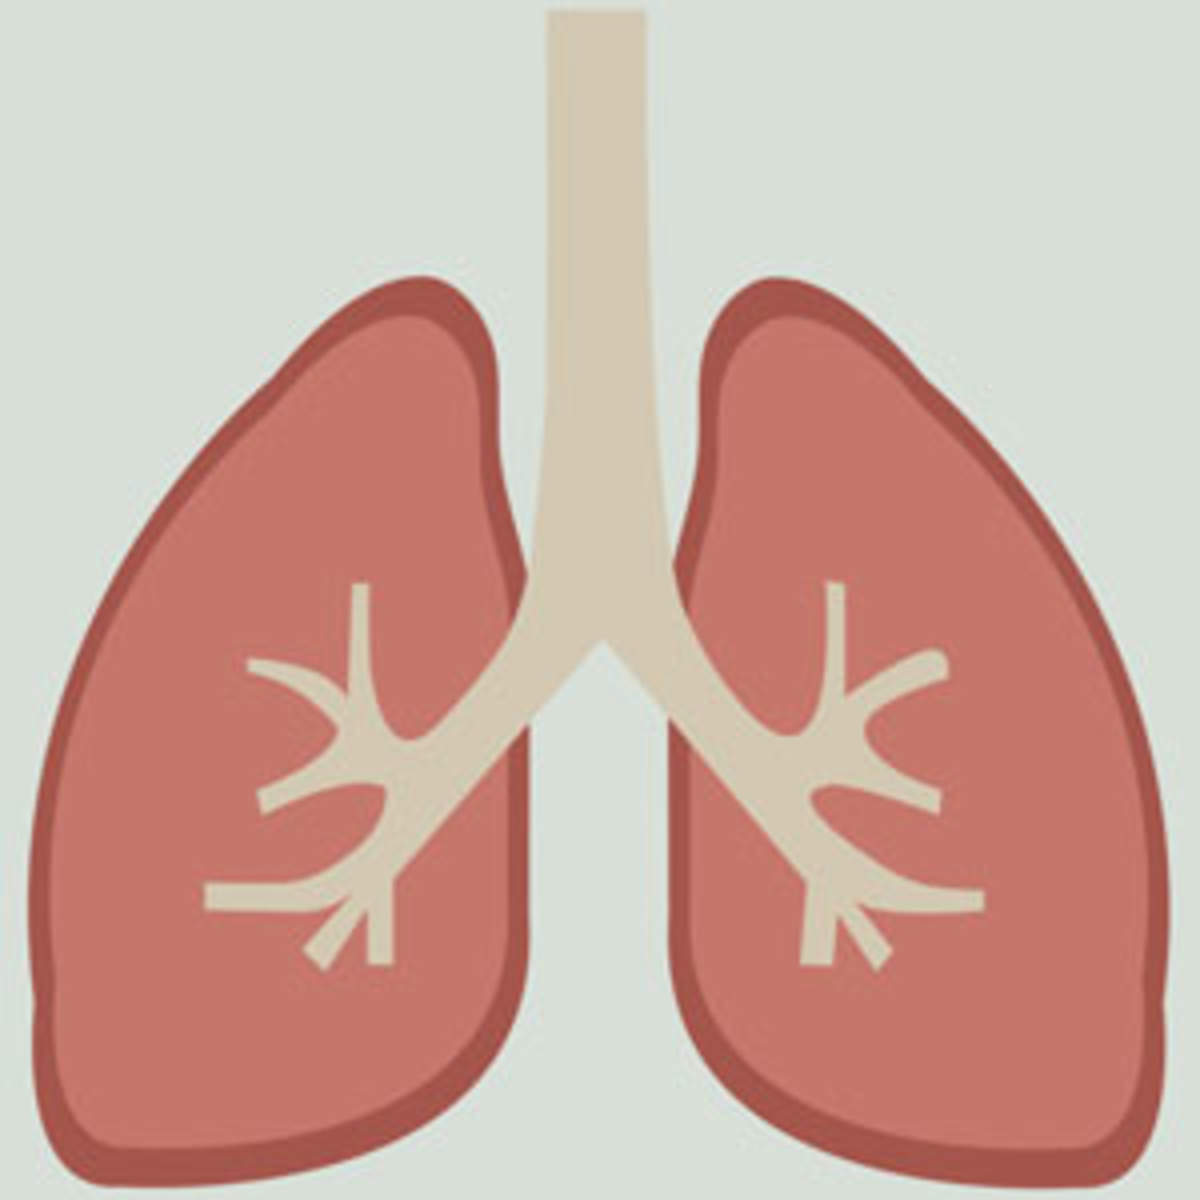 hiv and lung cancer risk